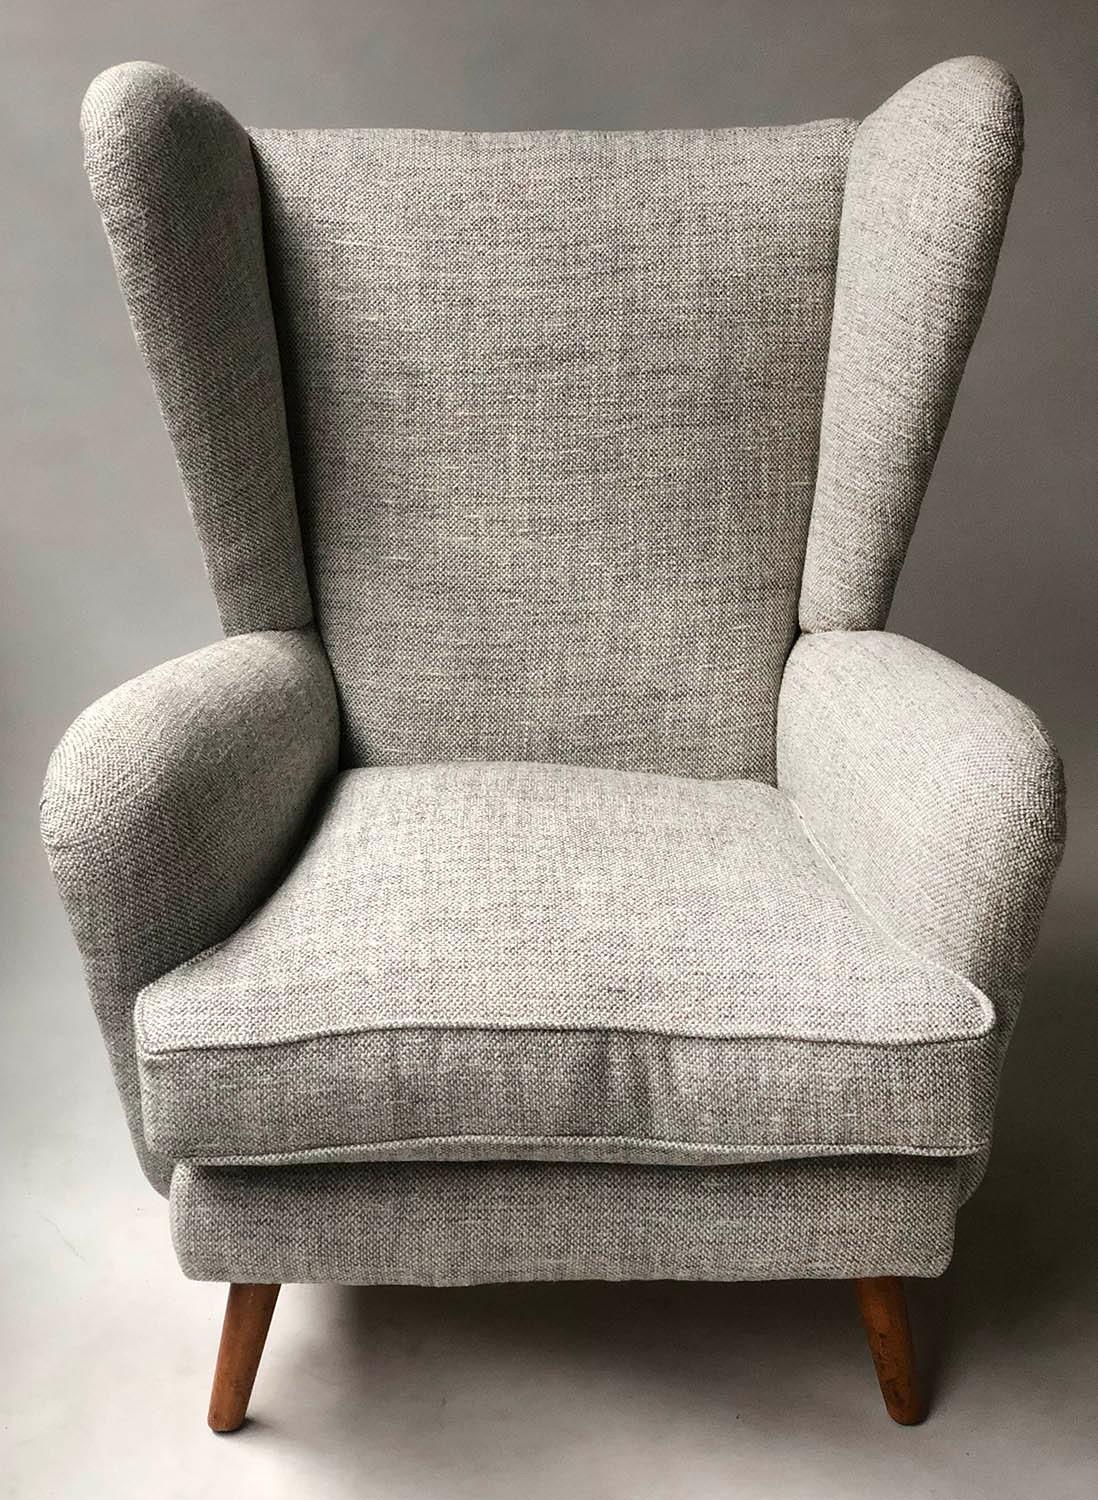 HOWARD KEITH ARMCHAIR, 1950's lounge chair newly upholstered in oatmeal soft tweed with splay - Image 2 of 5